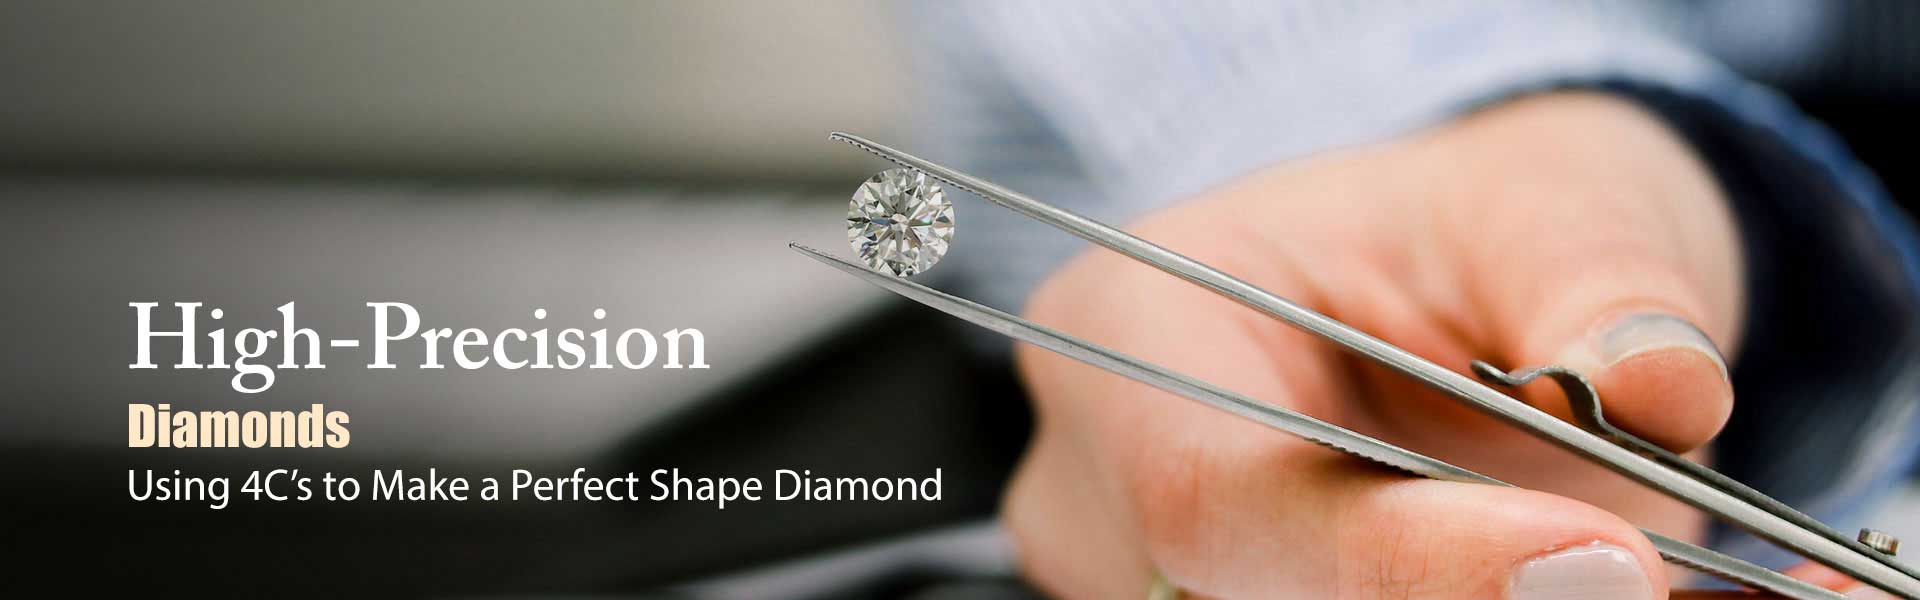  Certified Diamond  Manufacturers in Brussels